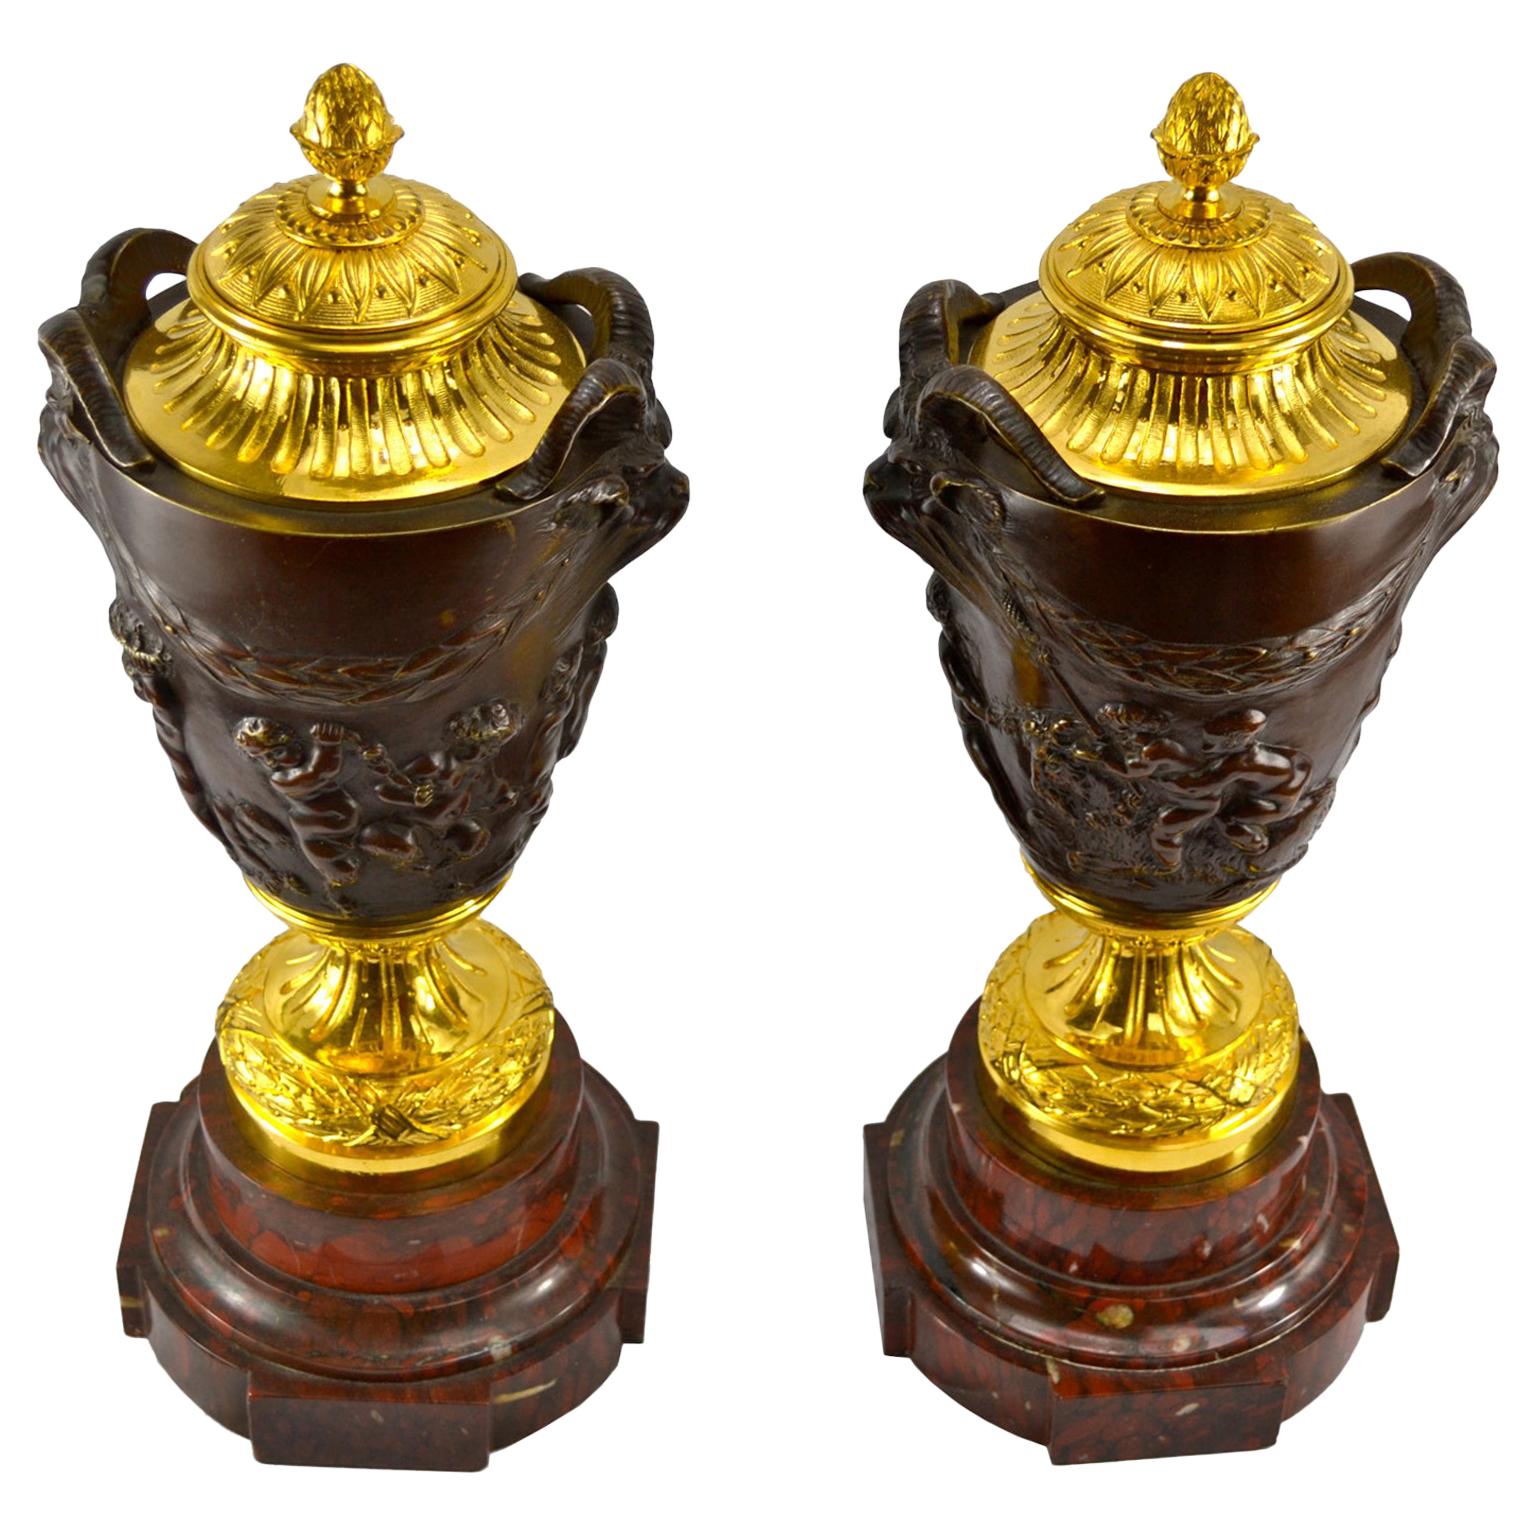 Pair of 19 Century Gilt and Patinated Bronze Cassolettes After Clodion